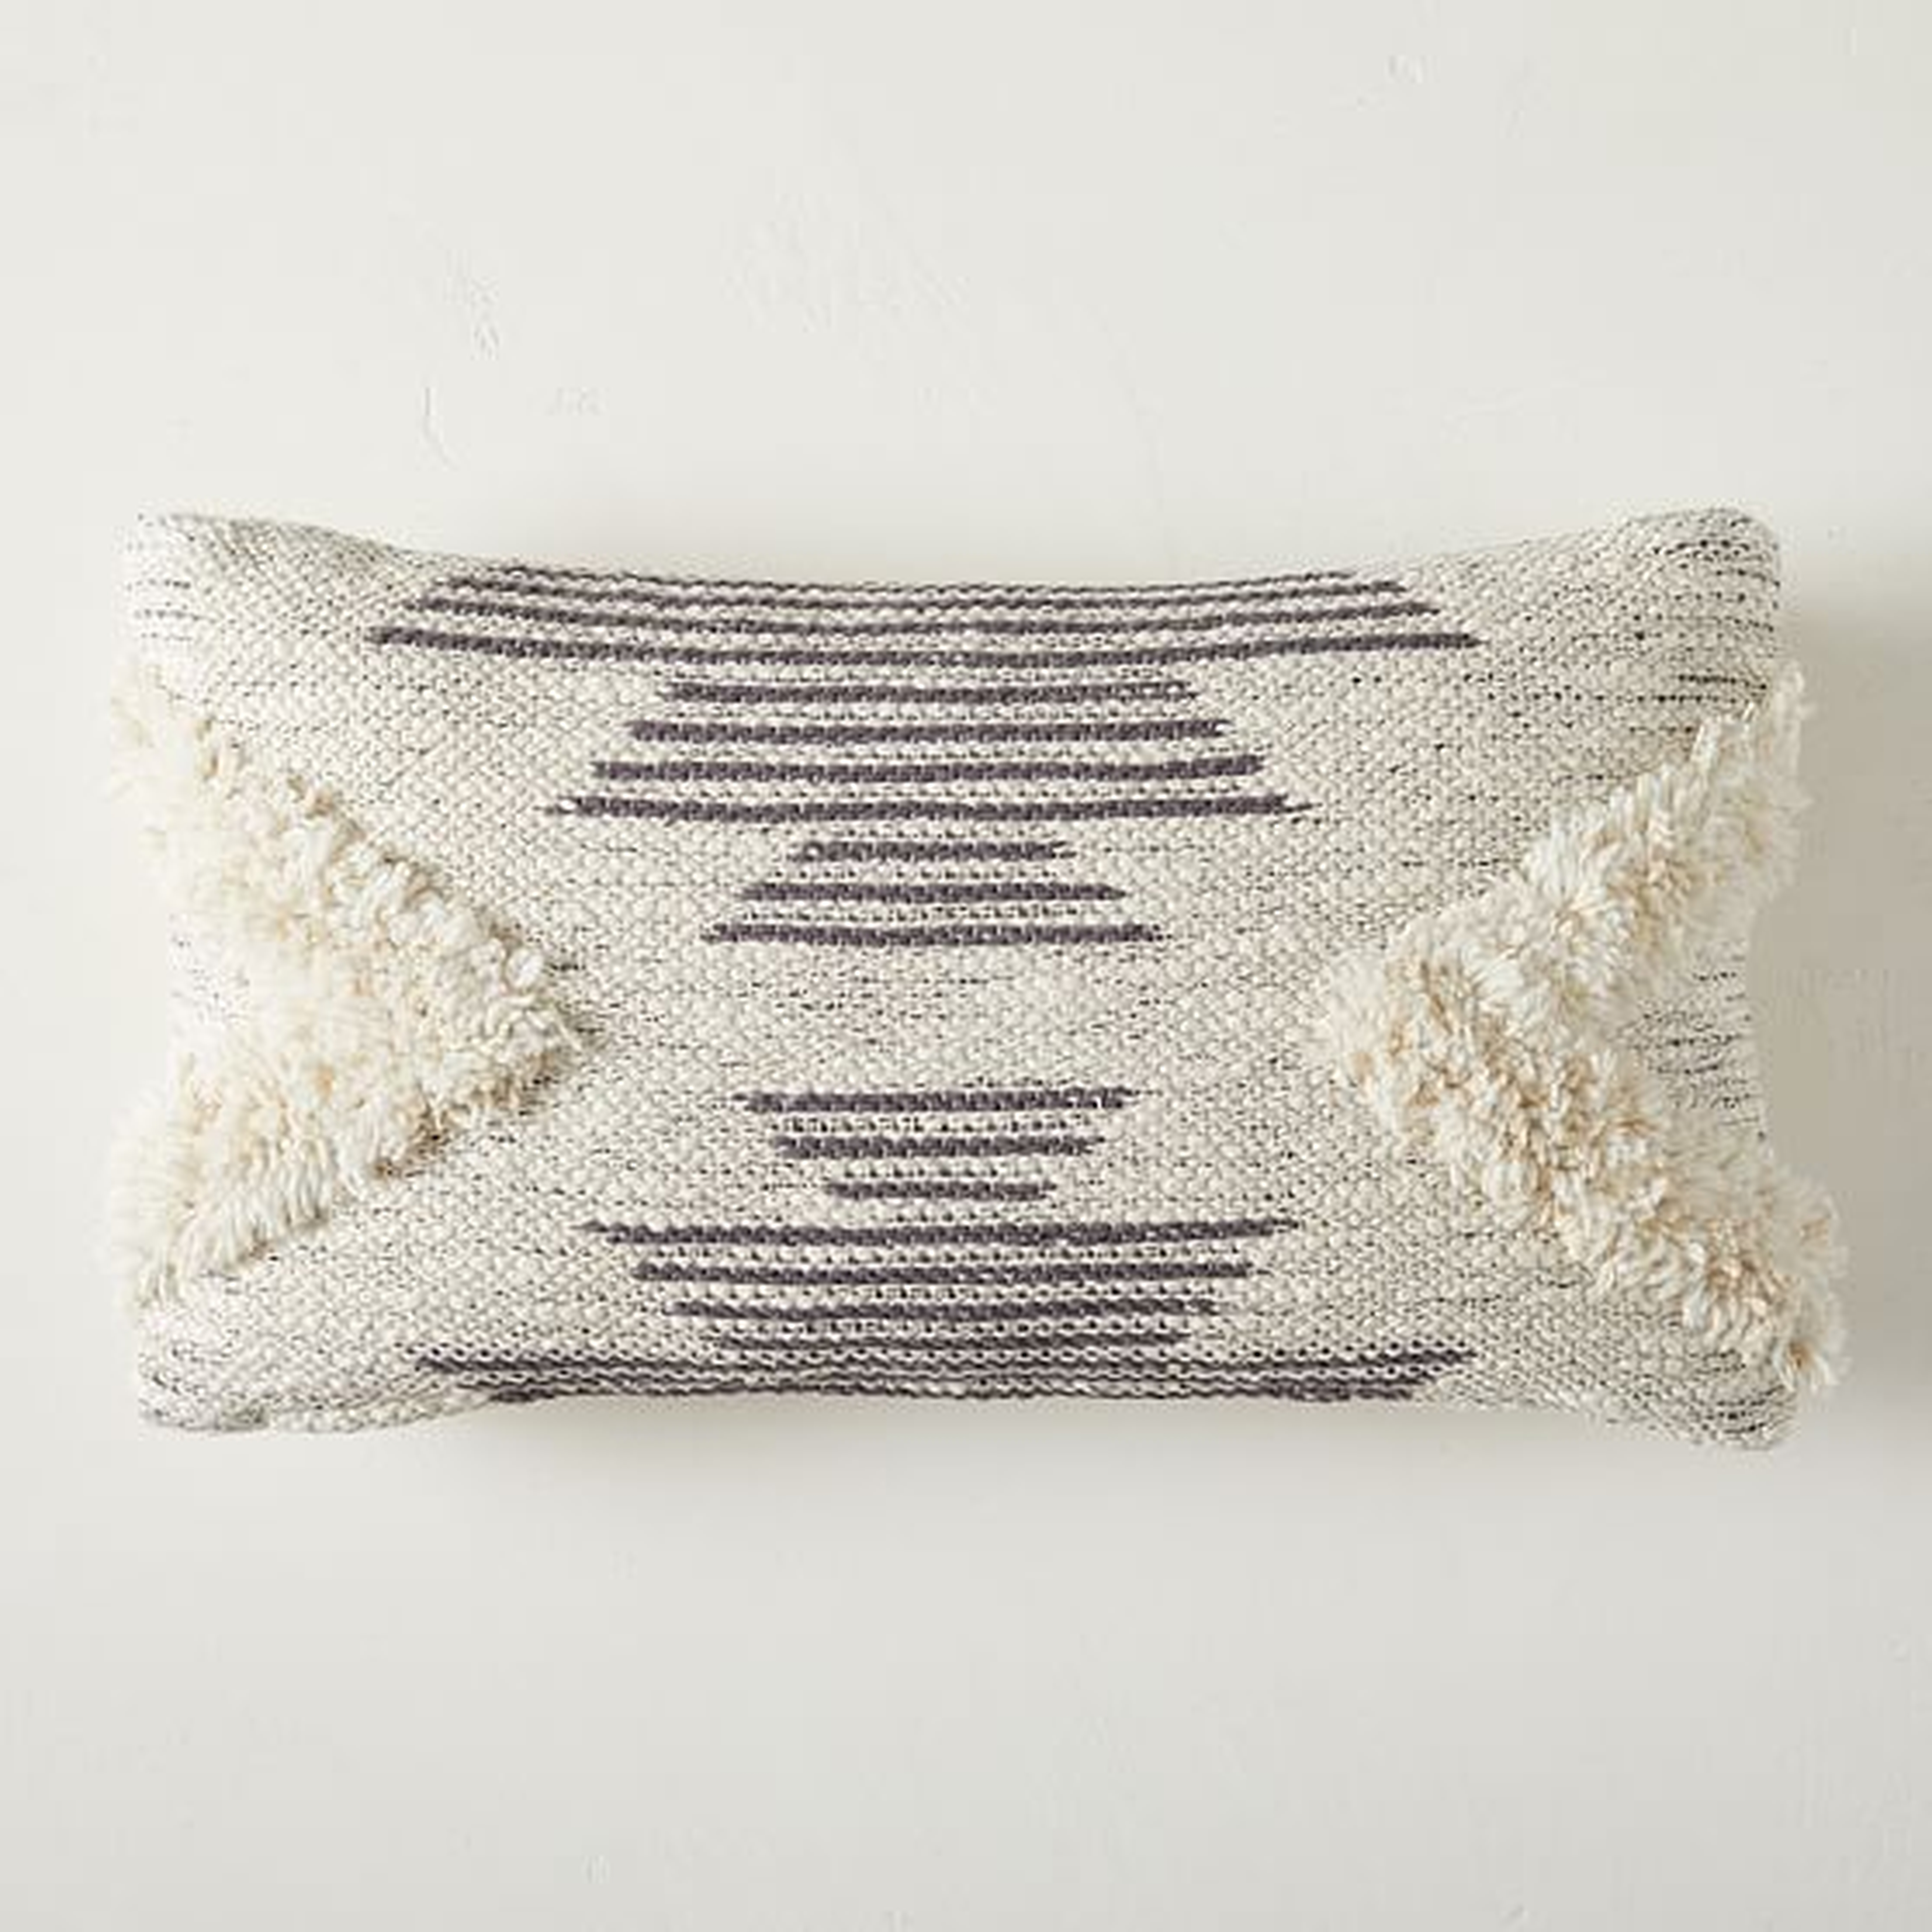 Meeting Shapes with Fringe Lumbar Pillow Cover, 12"x21", Neutral - West Elm